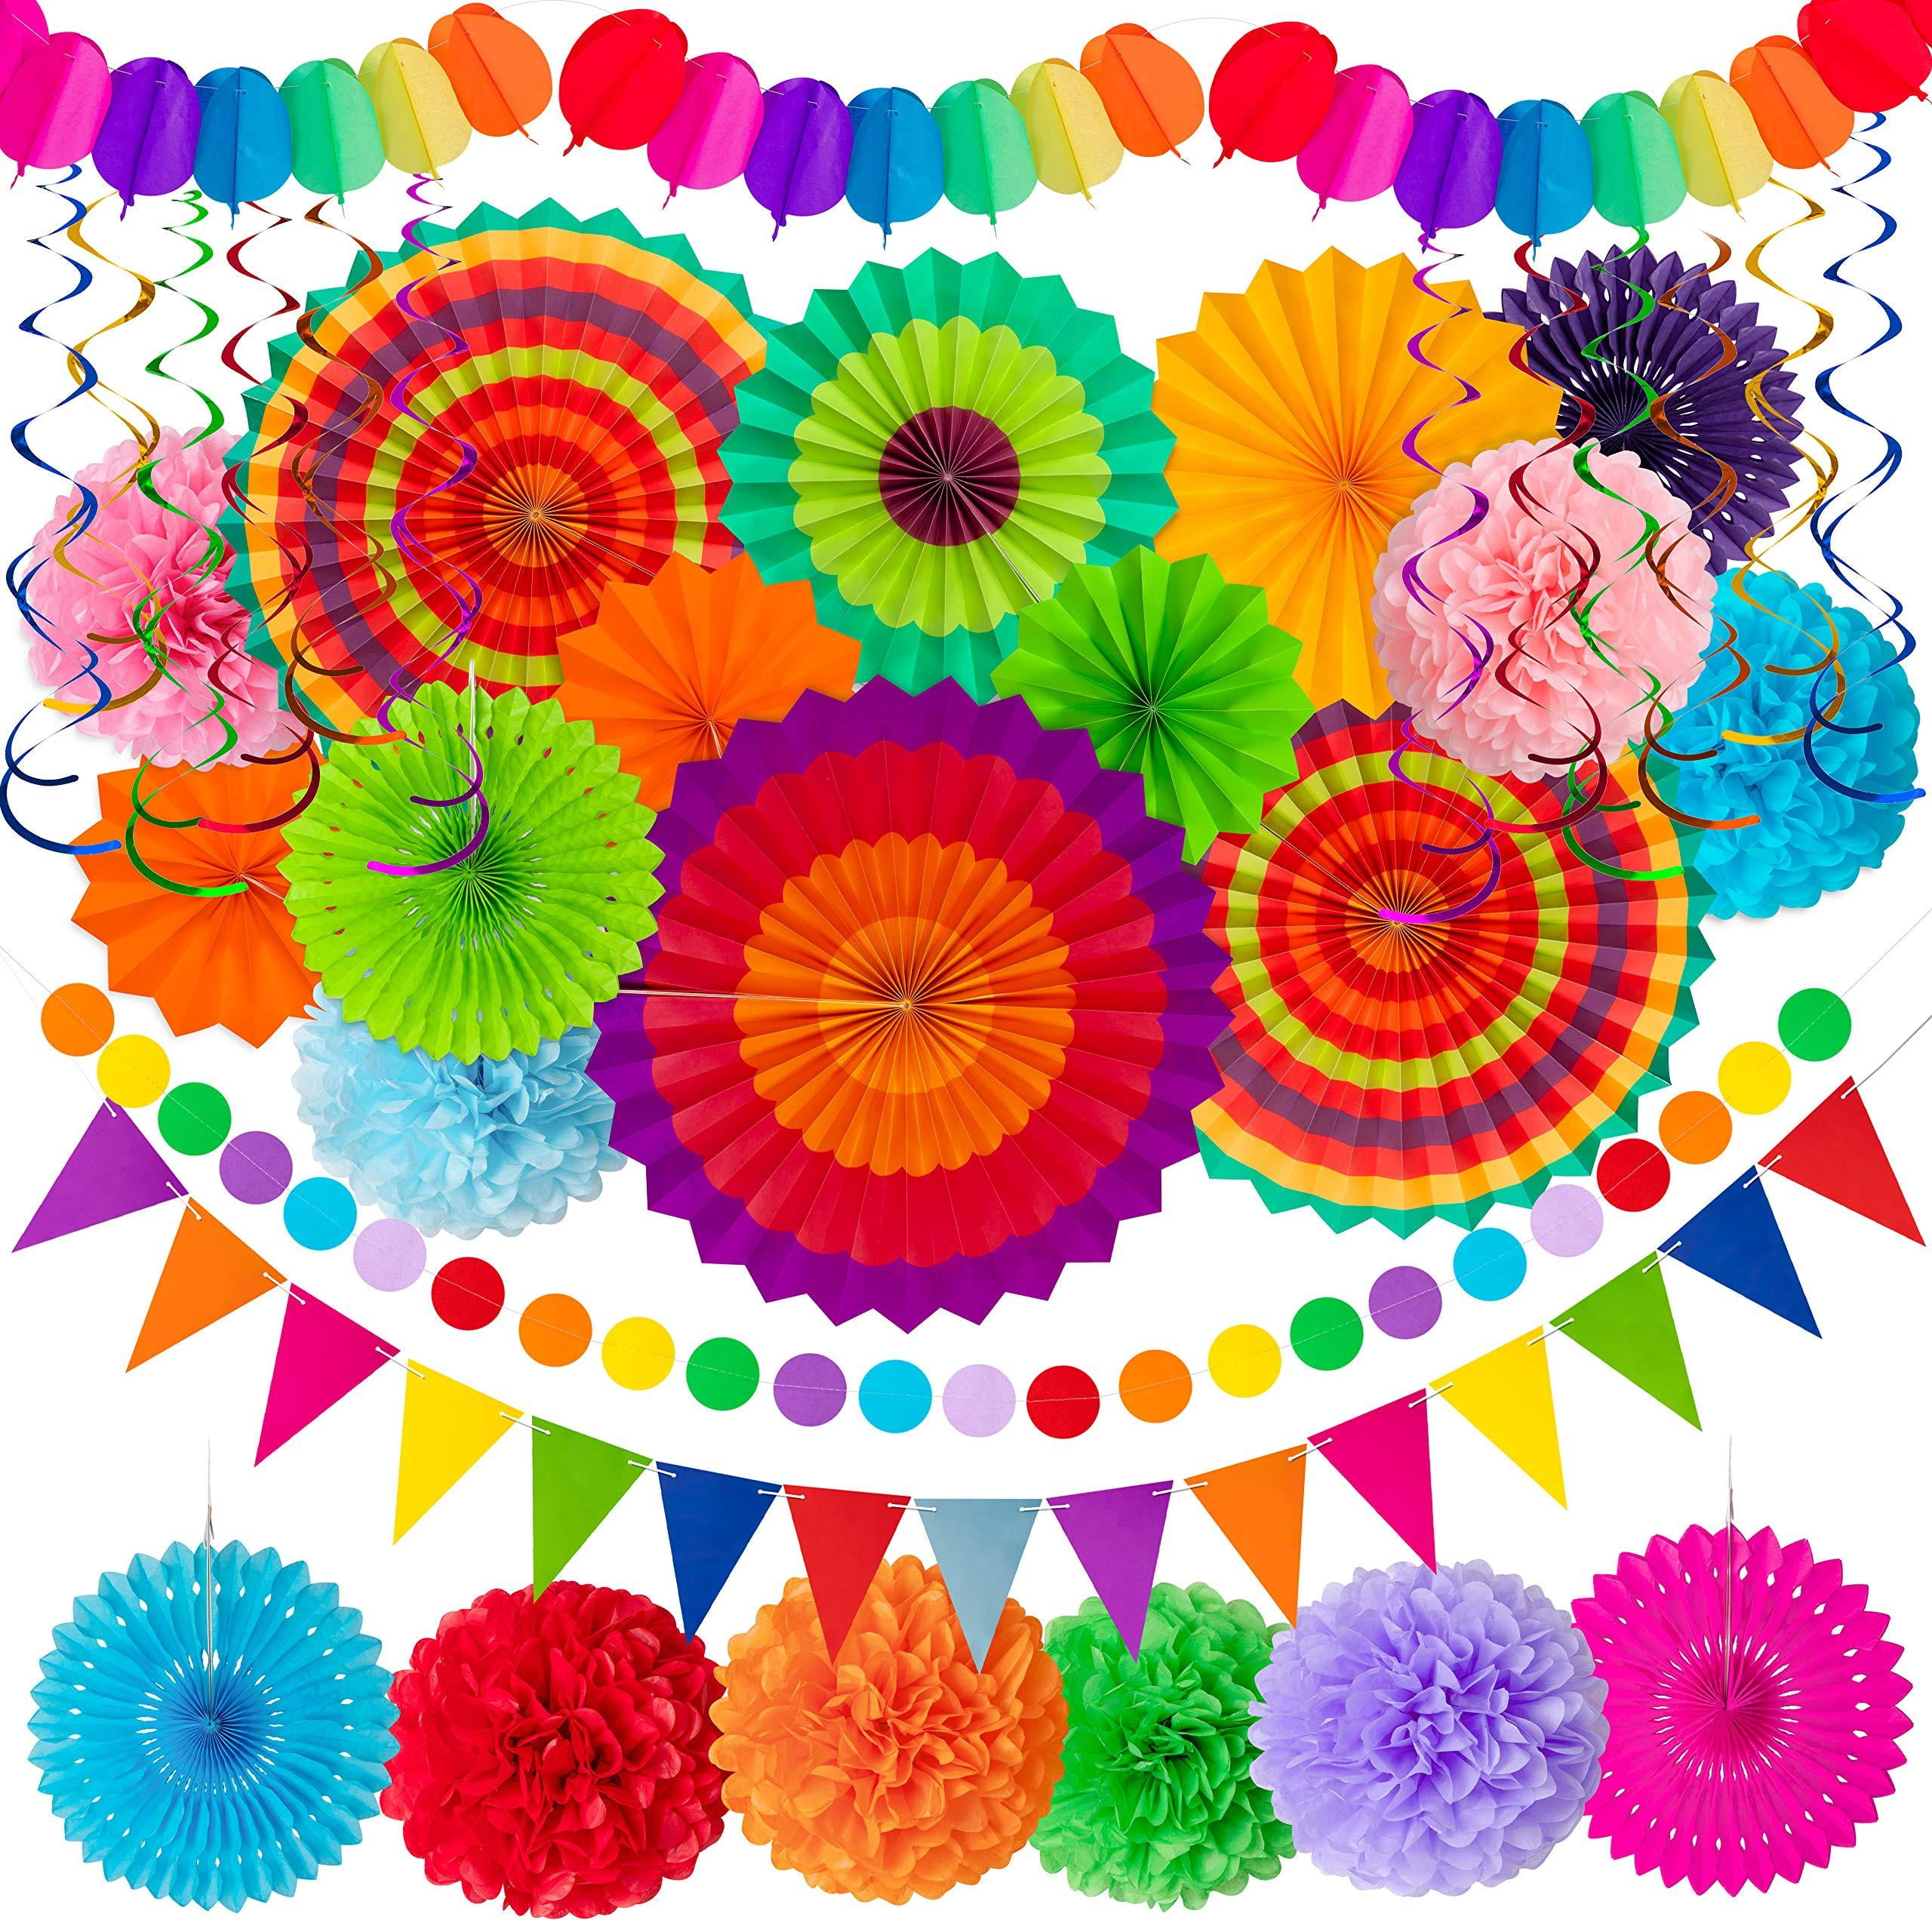 Fiesta or Mexican Party Auihiay 20 Pieces Fiesta Party Decoration Include Paper Fans Tissue Paper Pom Poms Circle Dot Garland and Tissue Paper Tassel for Birthday Parties Wedding Décor 